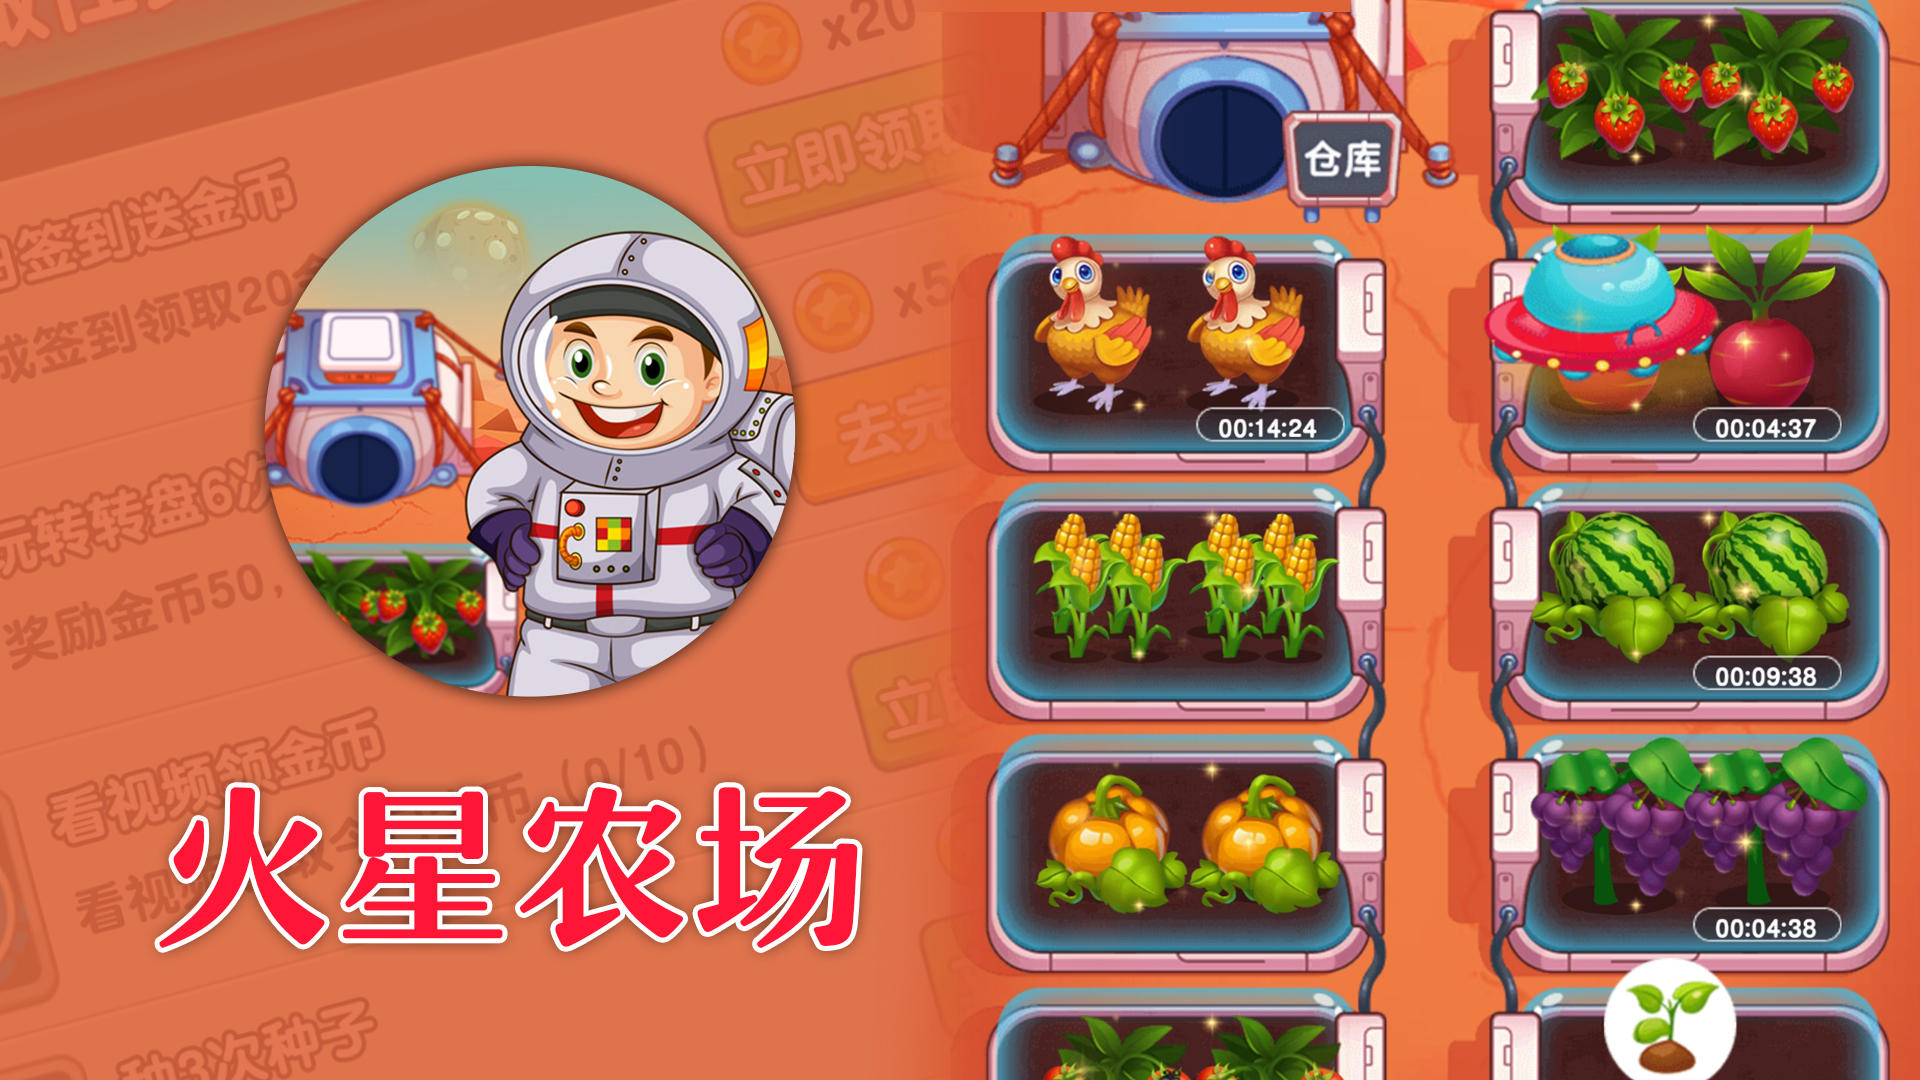 Banner of 火星農場 